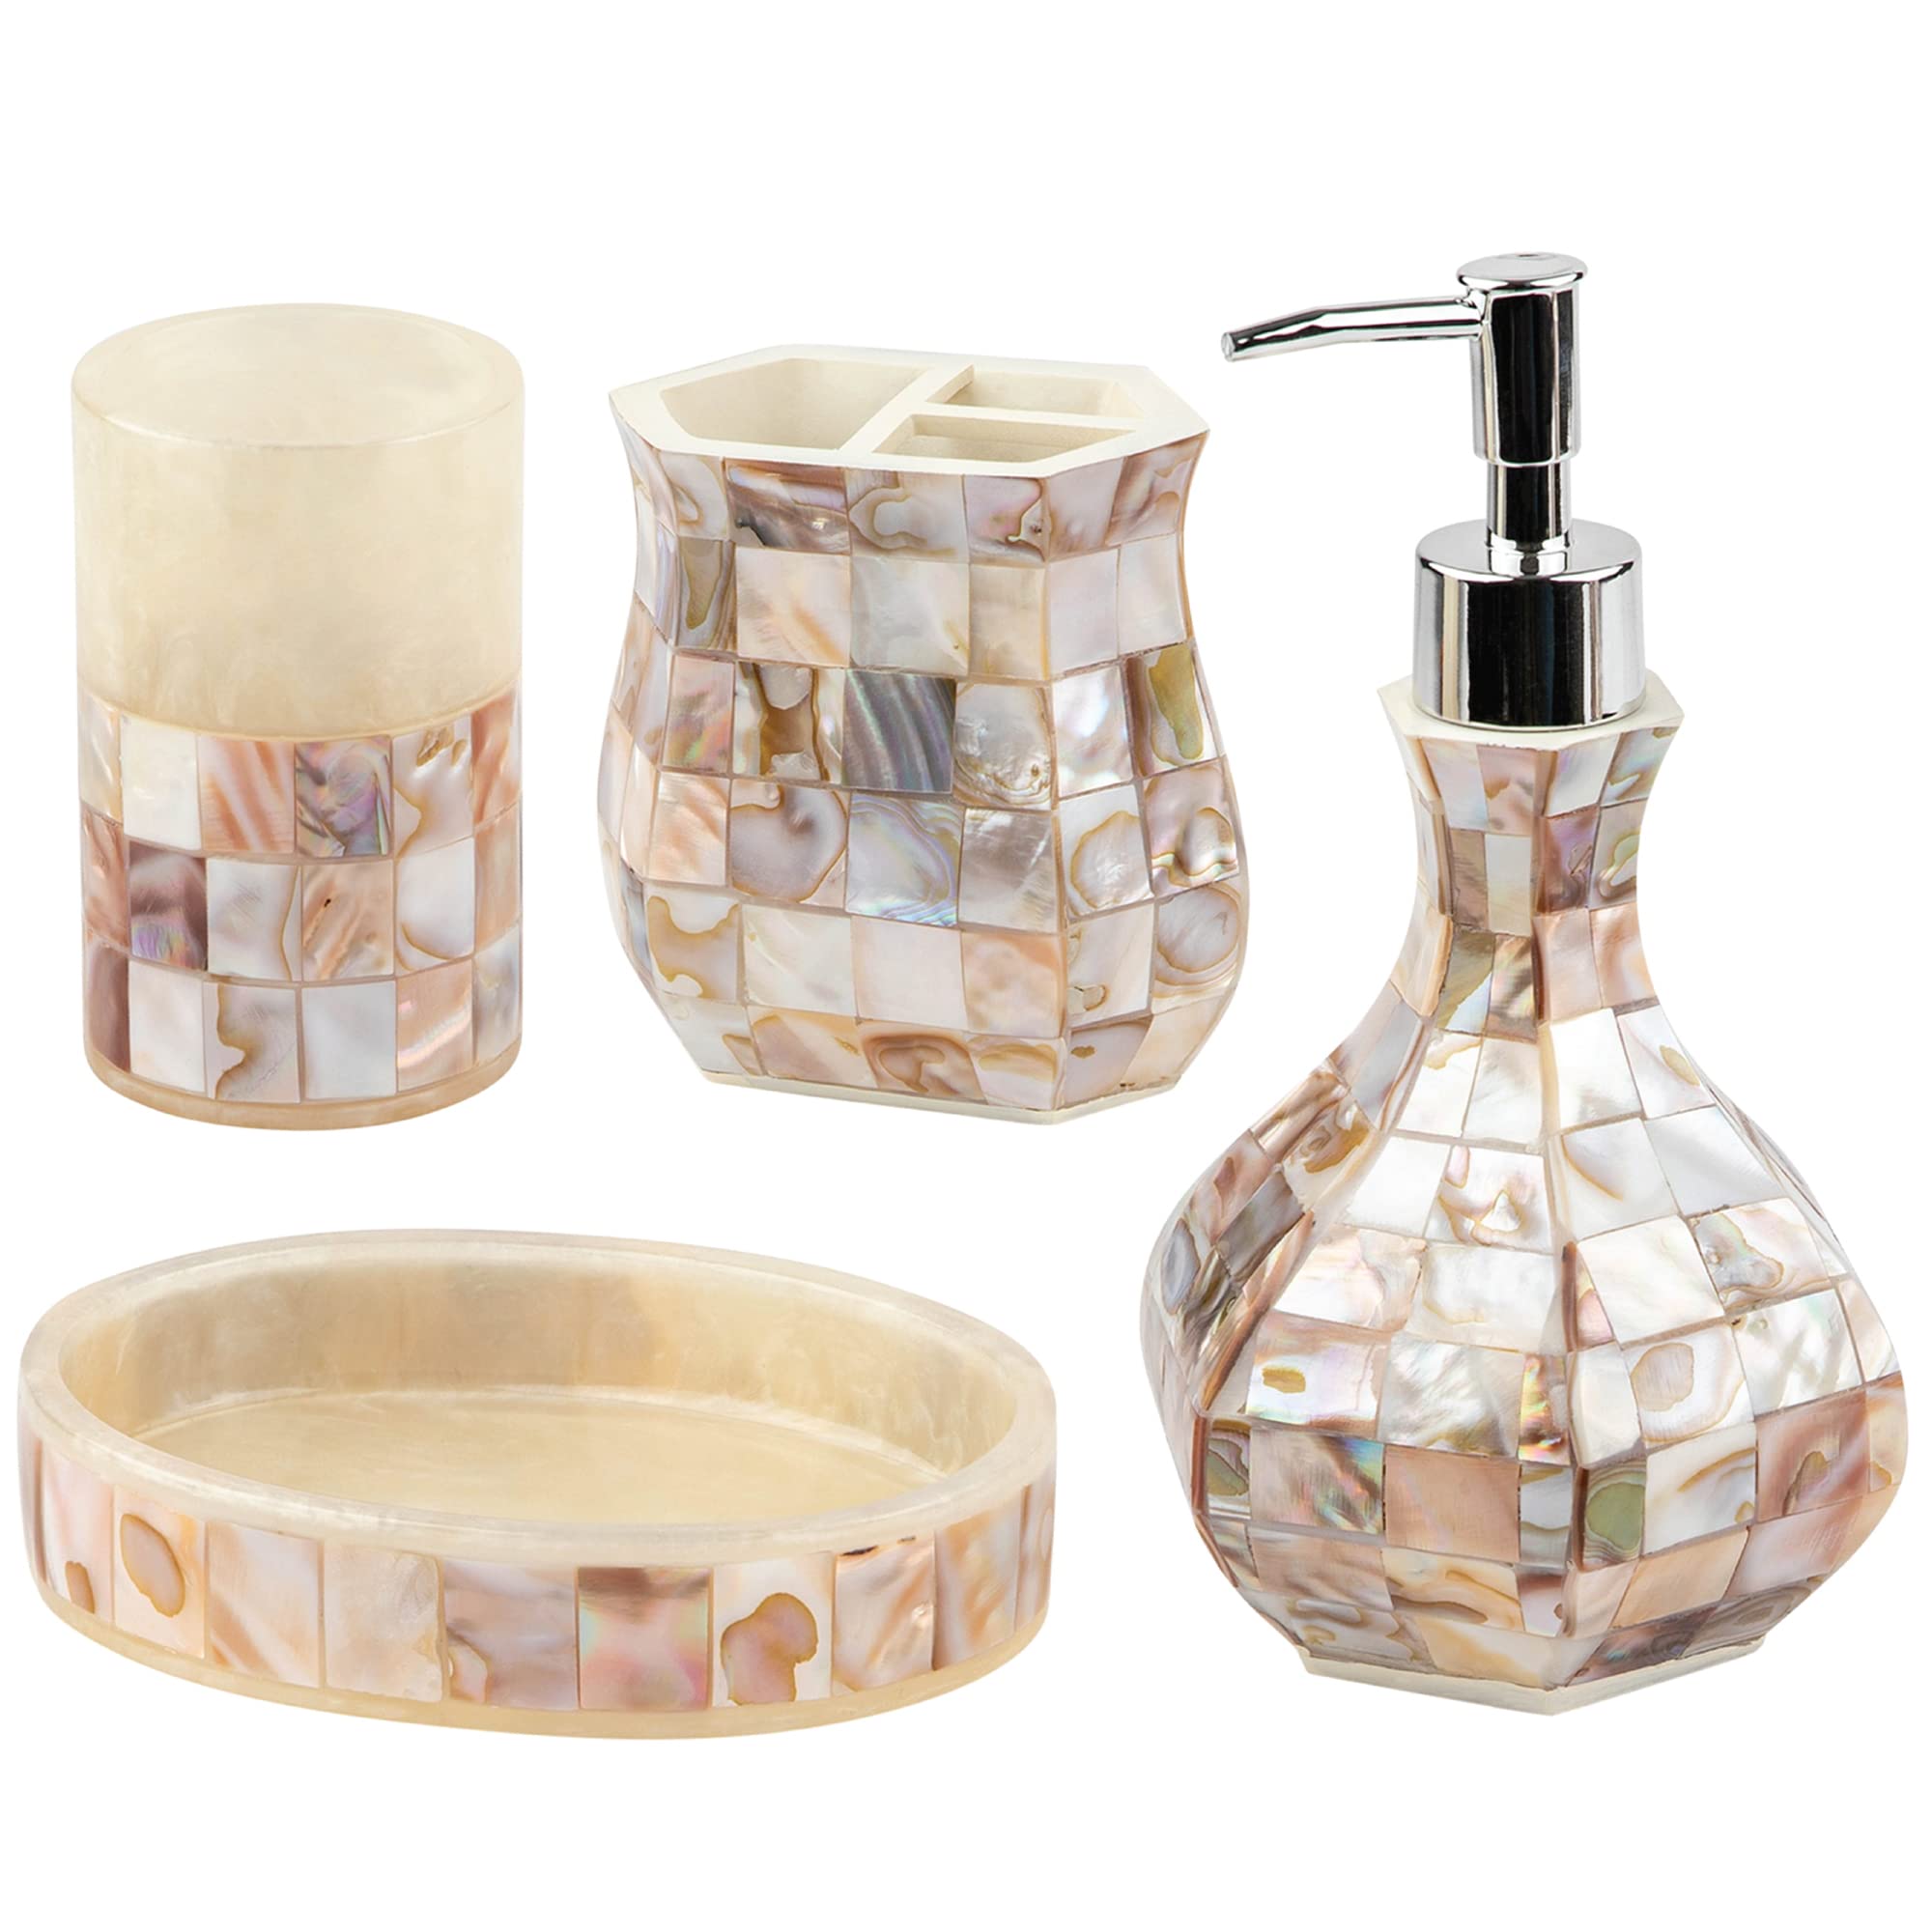 Bathroom Accessories Set - 4 Piece Bathroom Accessory Set with Natural Mother of Pearl Shells - Decorative Bathroom Set Includes: Soap Dispenser, Toothbrush Holder, Tumbler and Soap Dish  - Like New